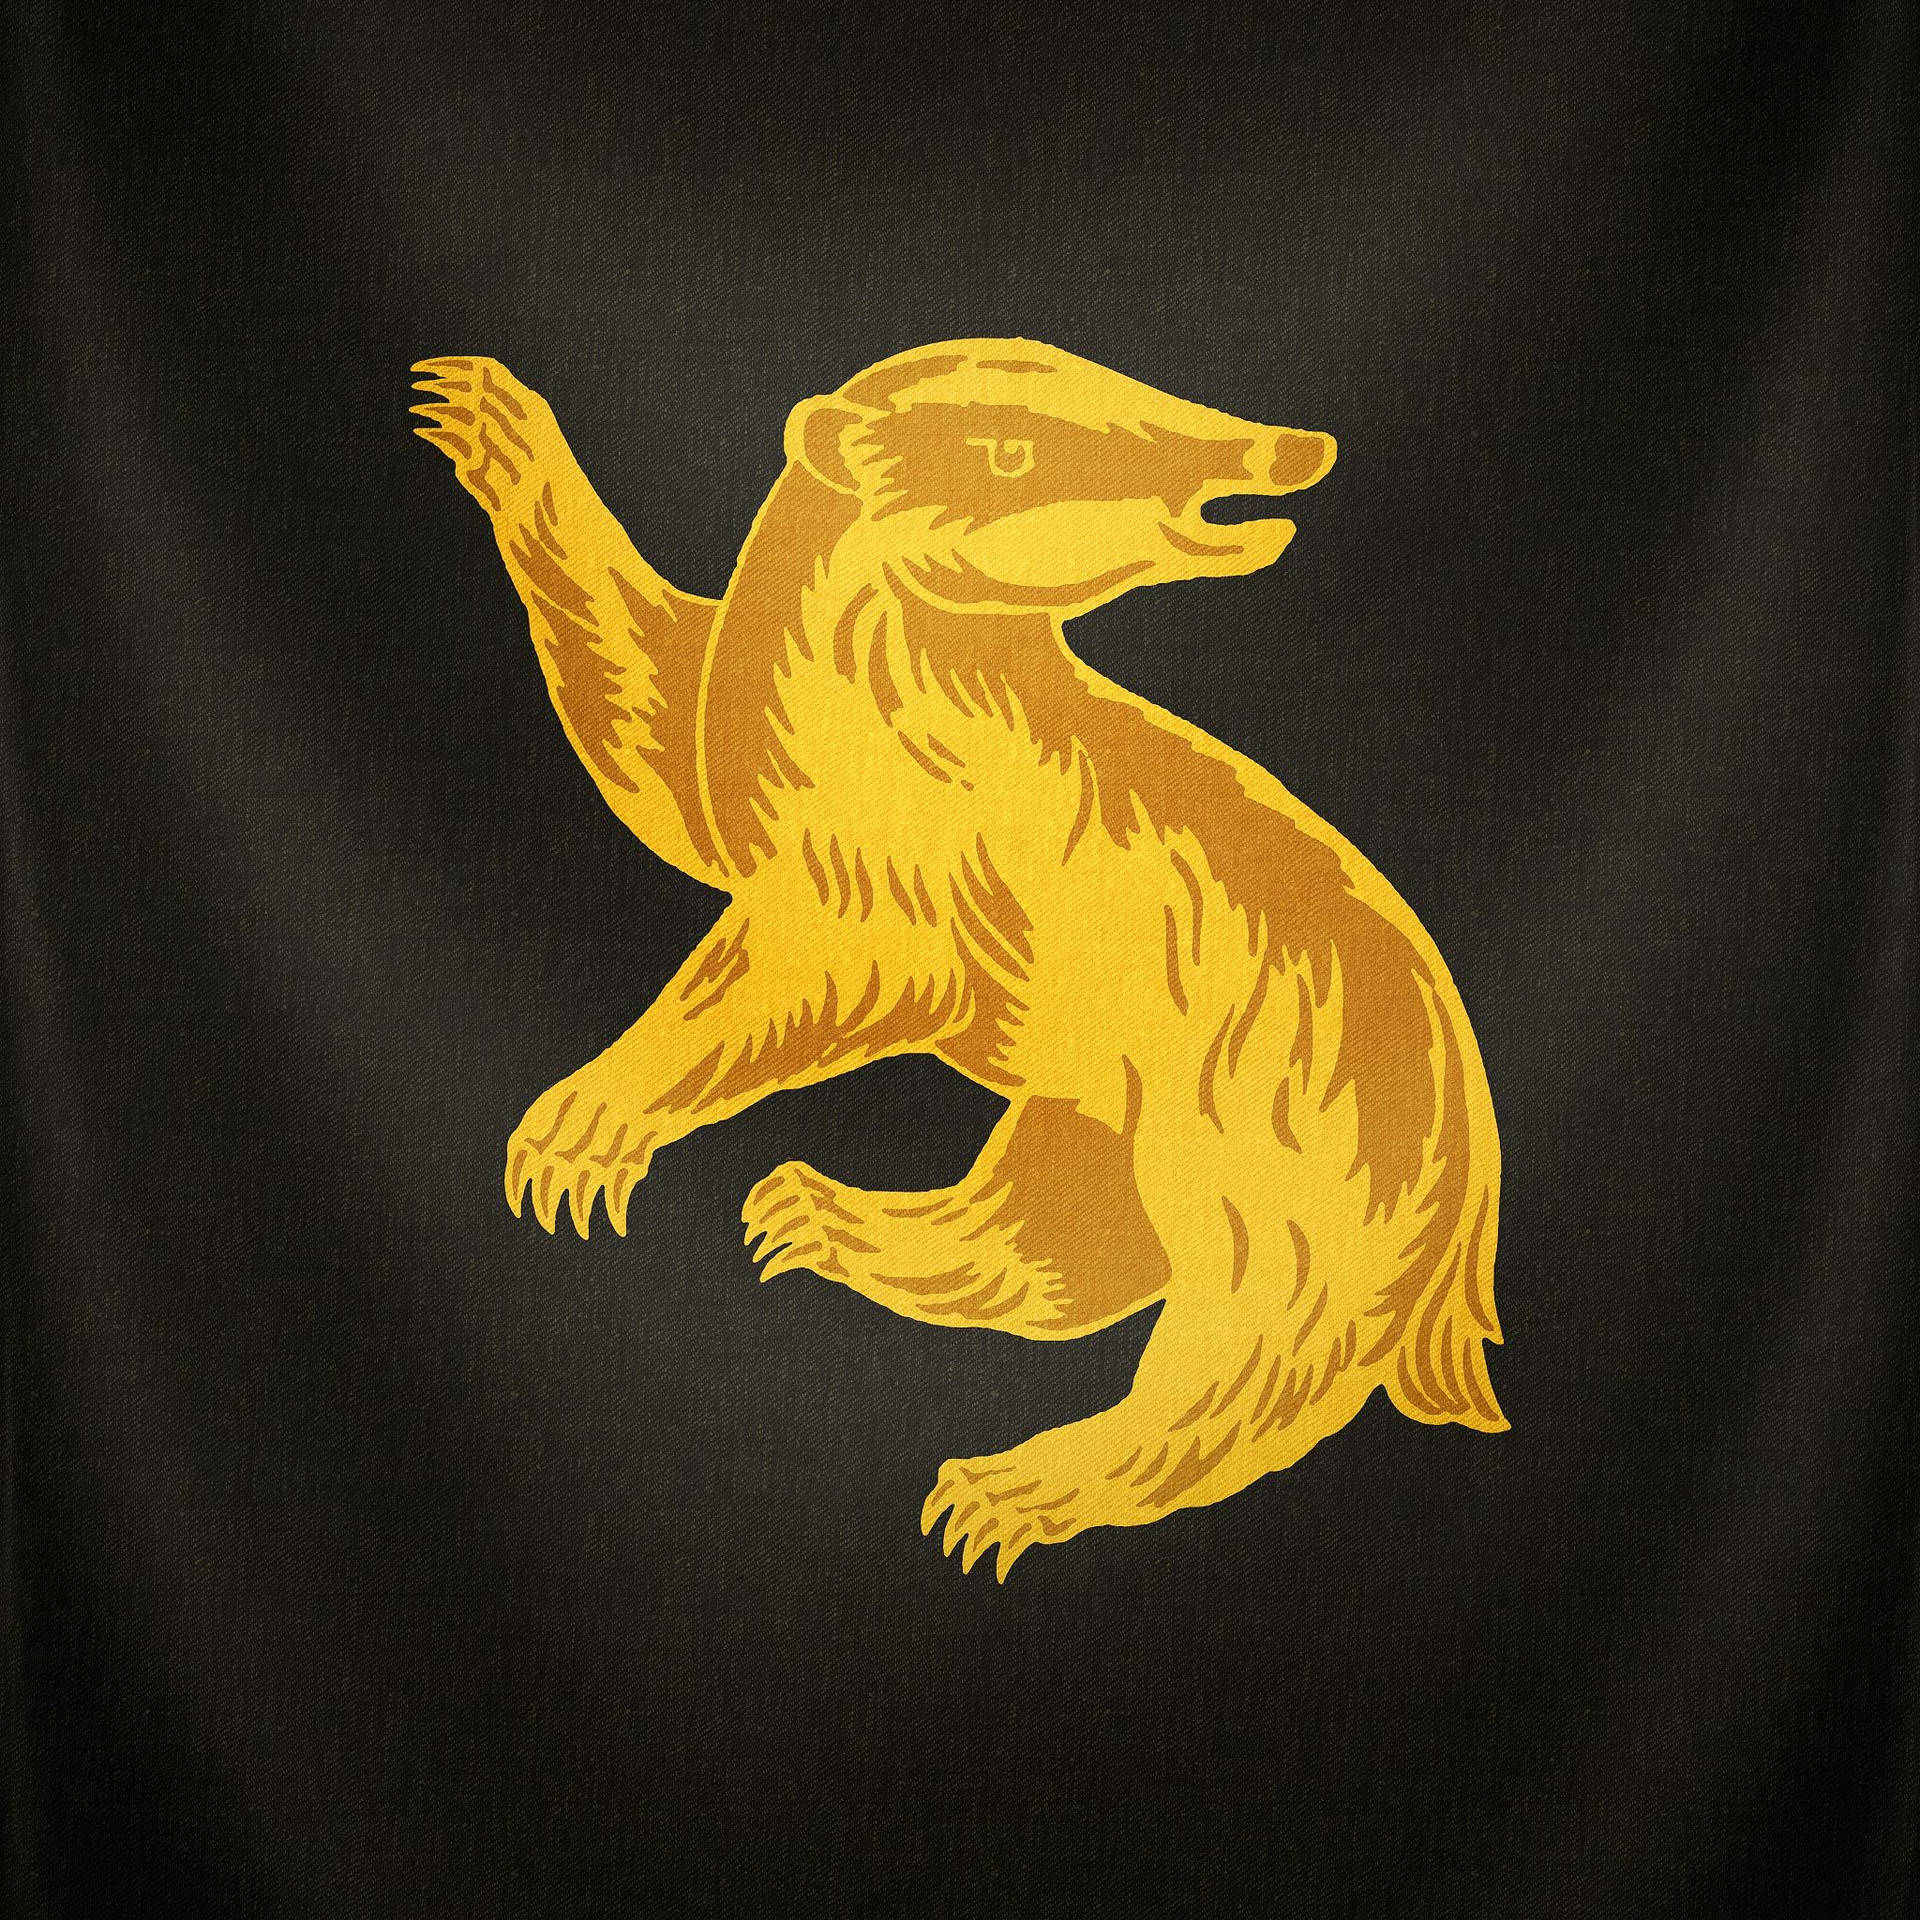 show your Hogwarts house pride with the Hufflepuff badger flag! Wallpaper